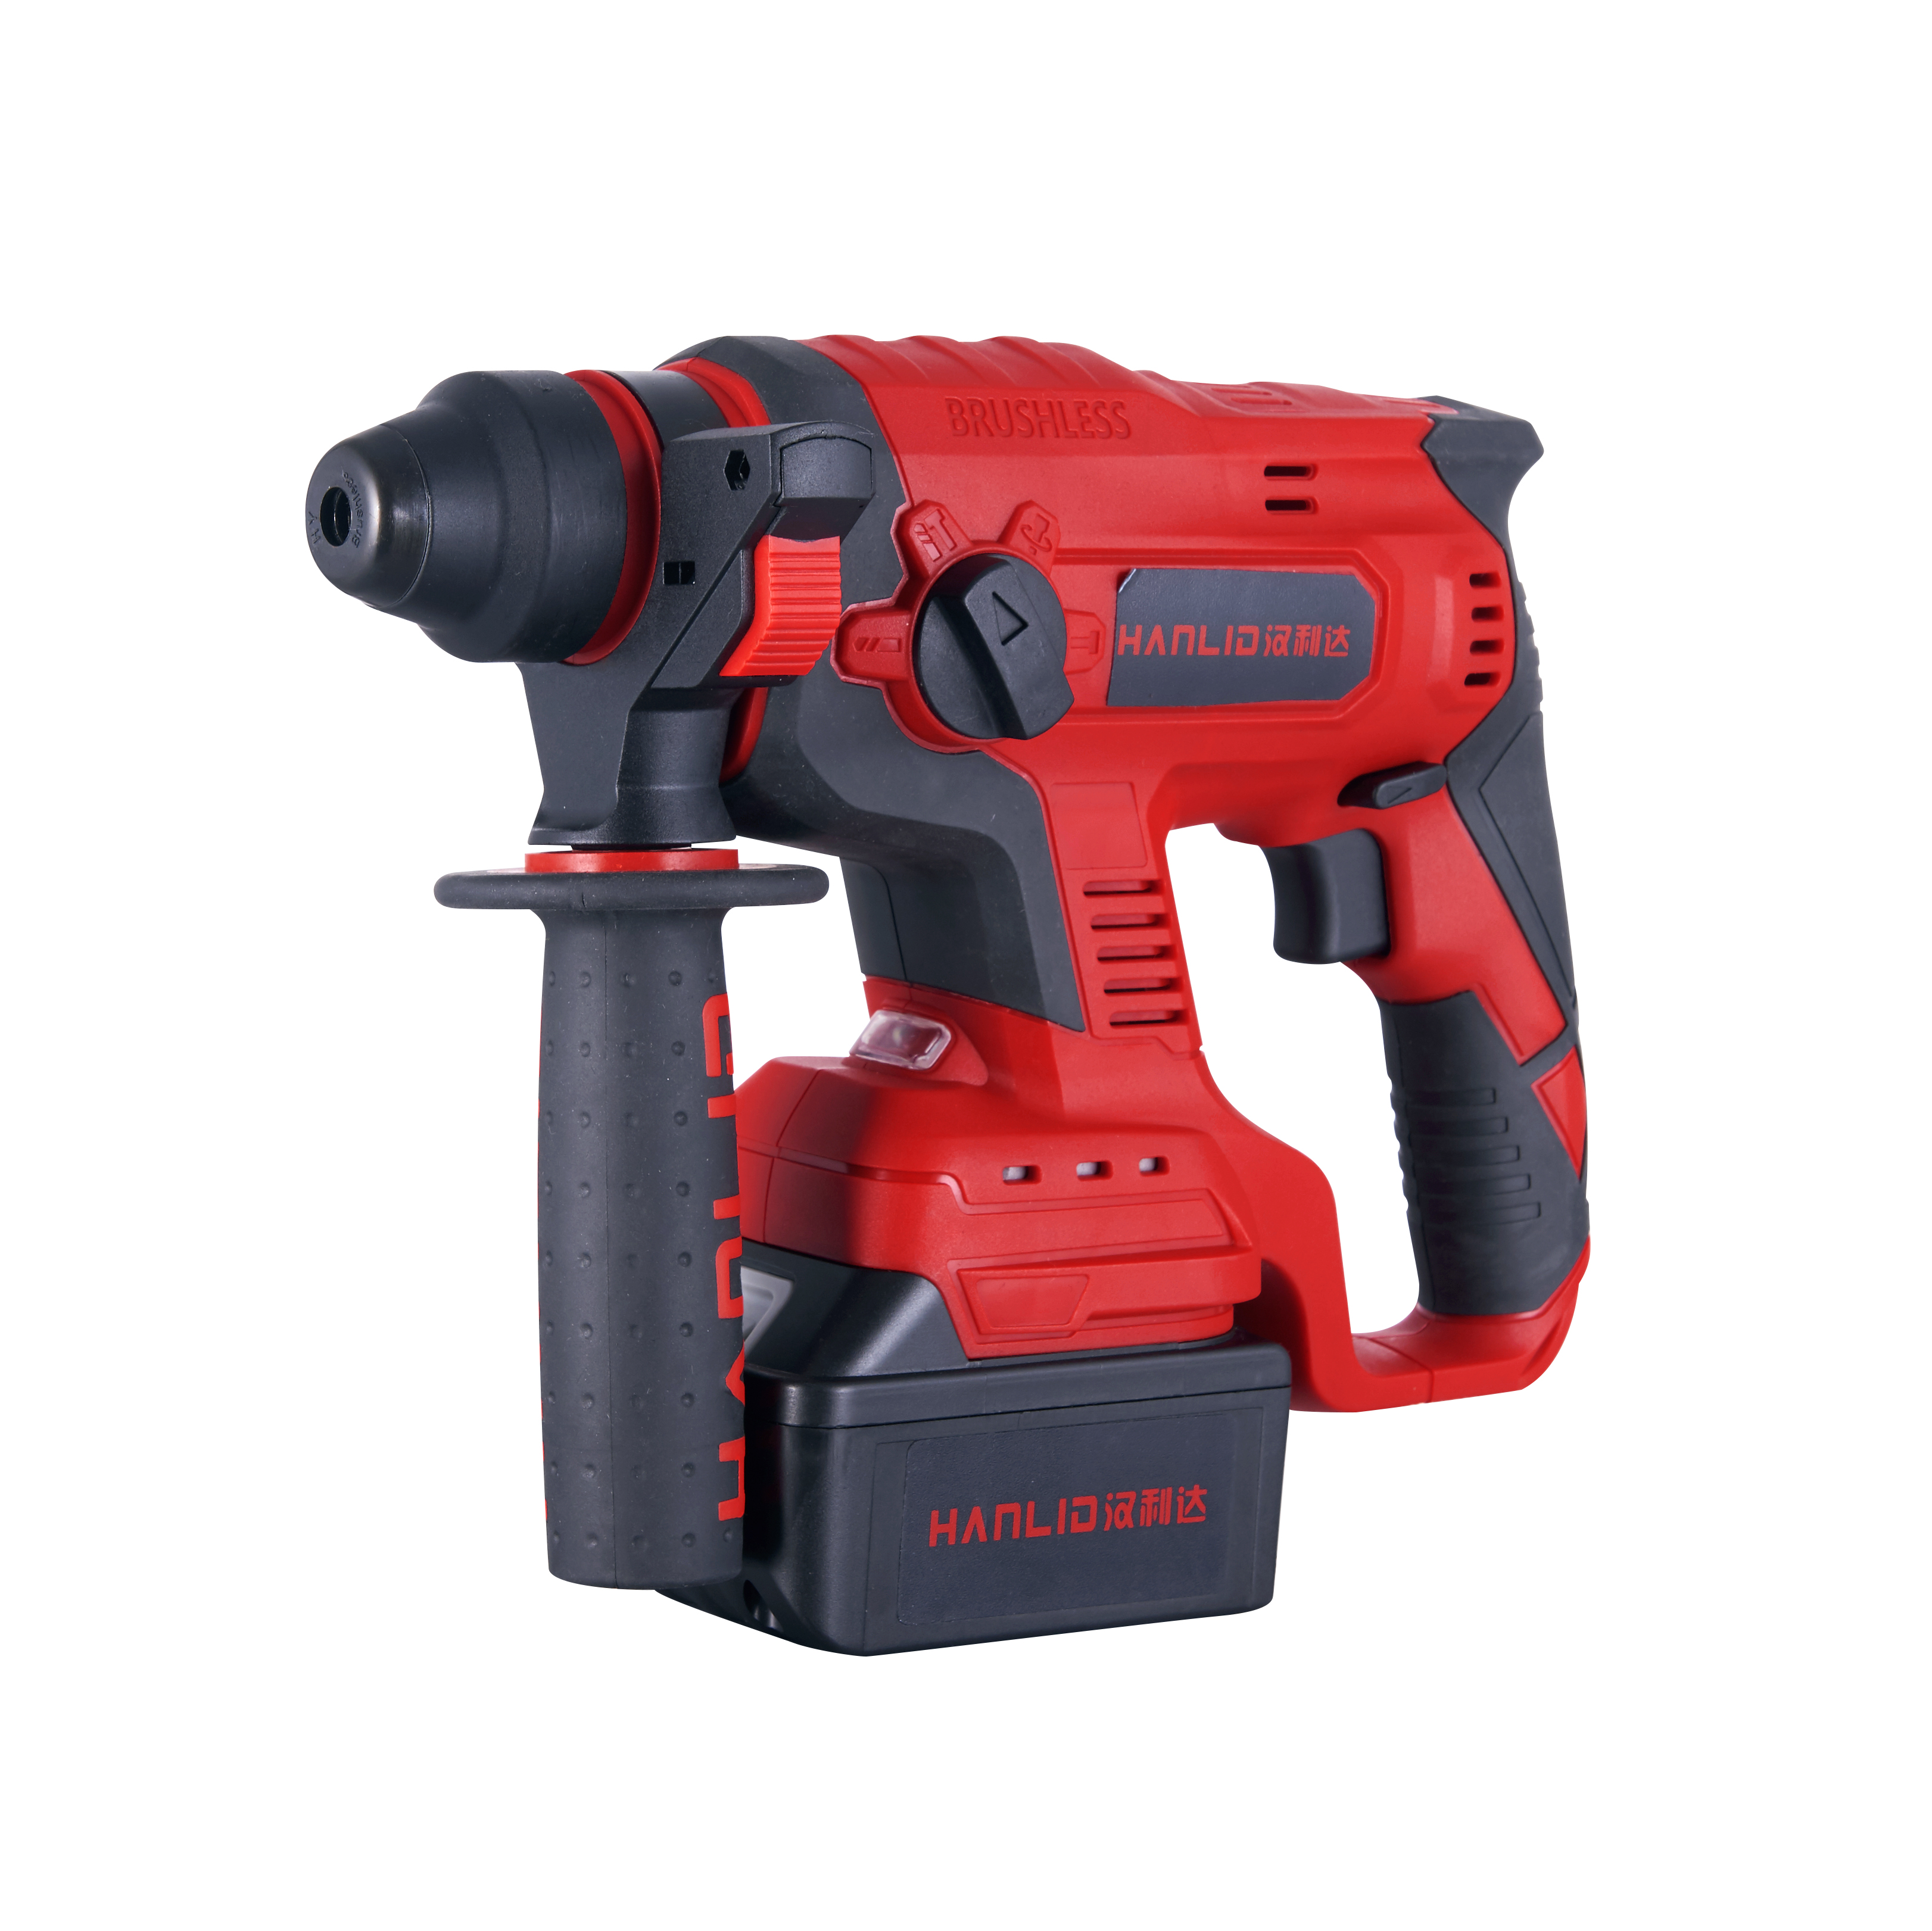 Cordless Hammer Drill 20mm Zhl-20 Featured Image